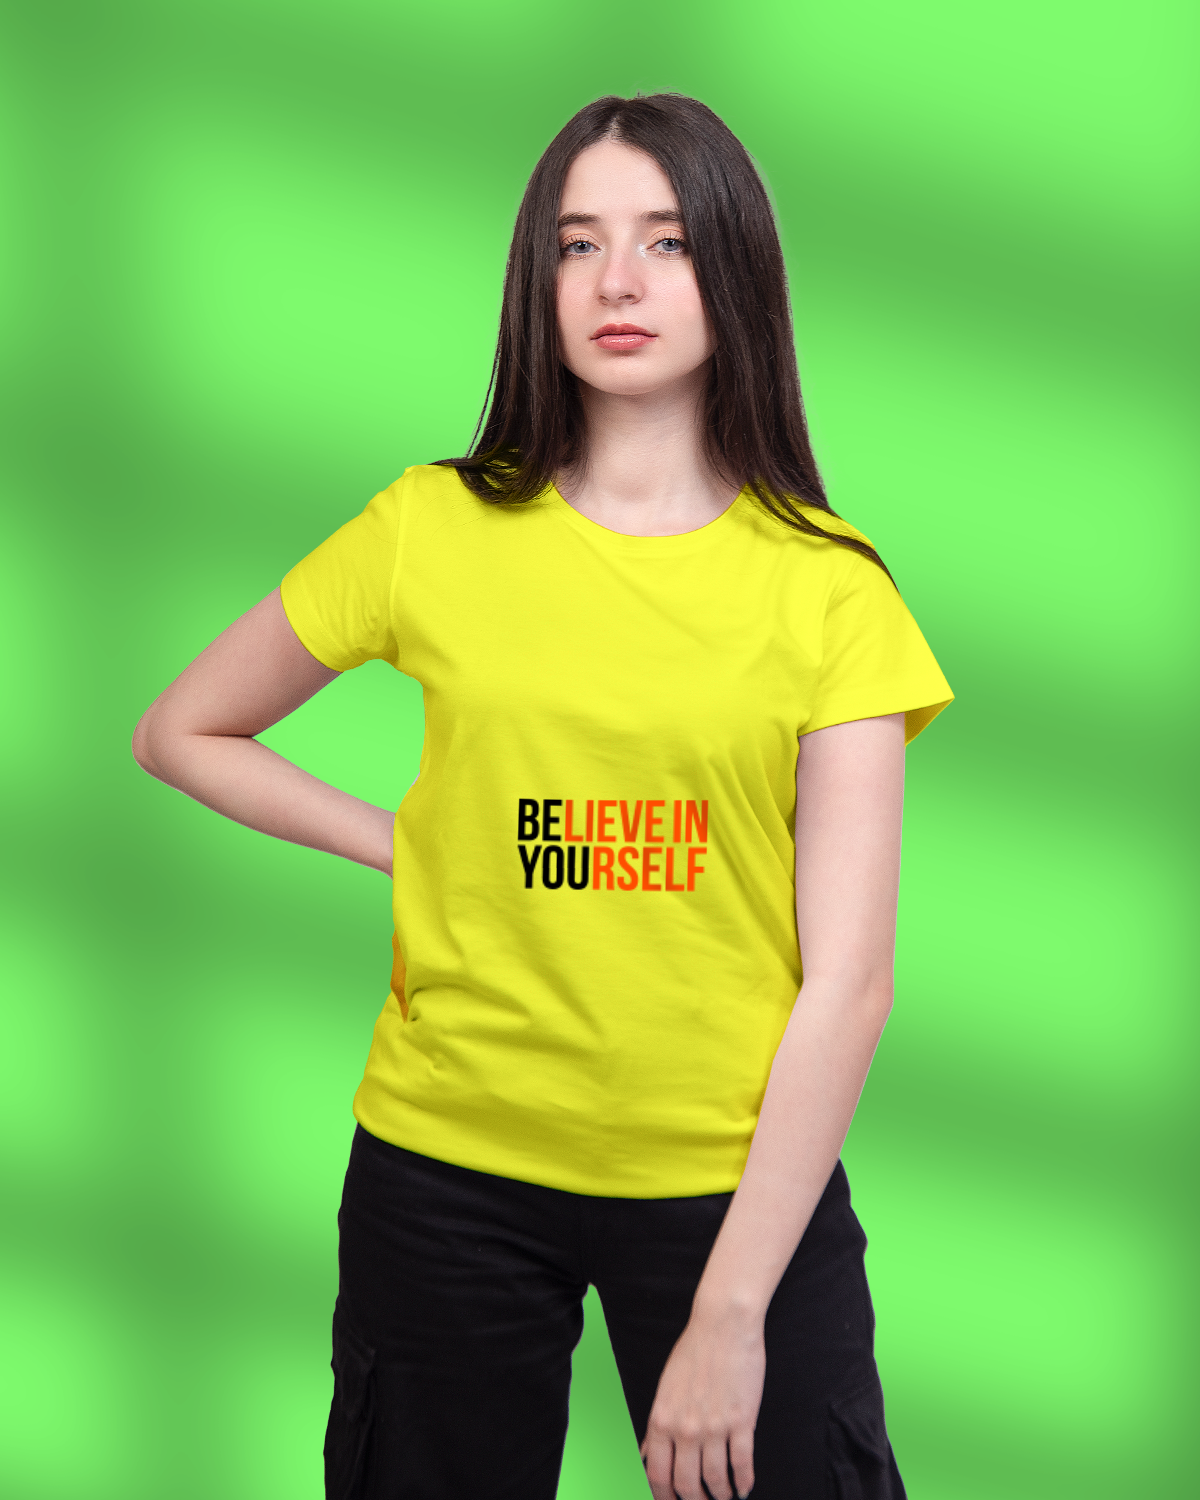 T-shirt For Women (Be Lieve In Yourself)